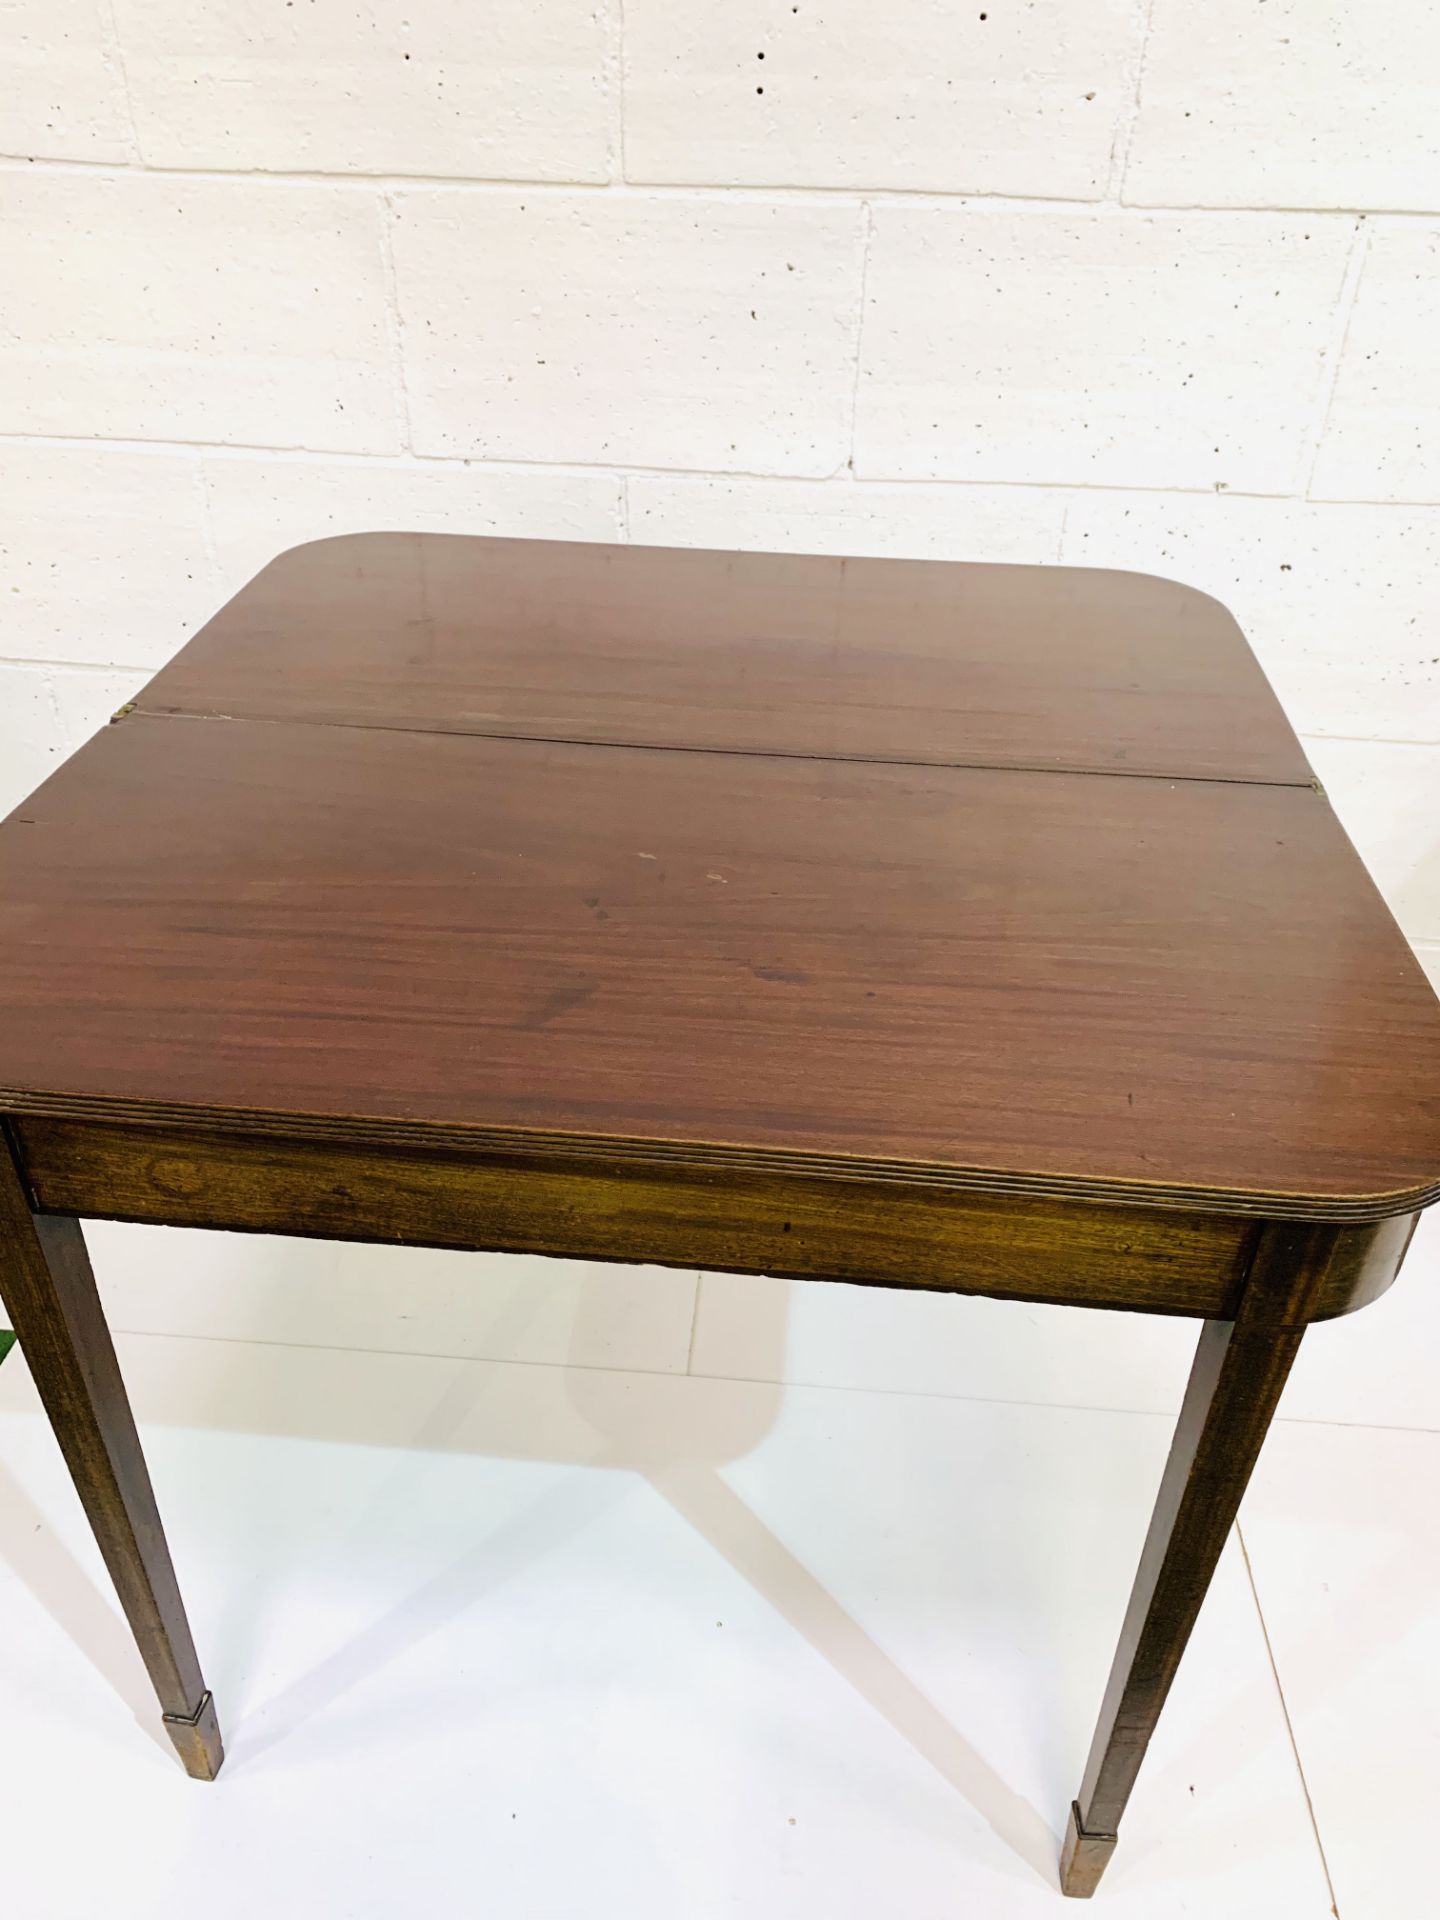 Mahogany gate leg side table with fold over top on tapered legs. - Image 4 of 4